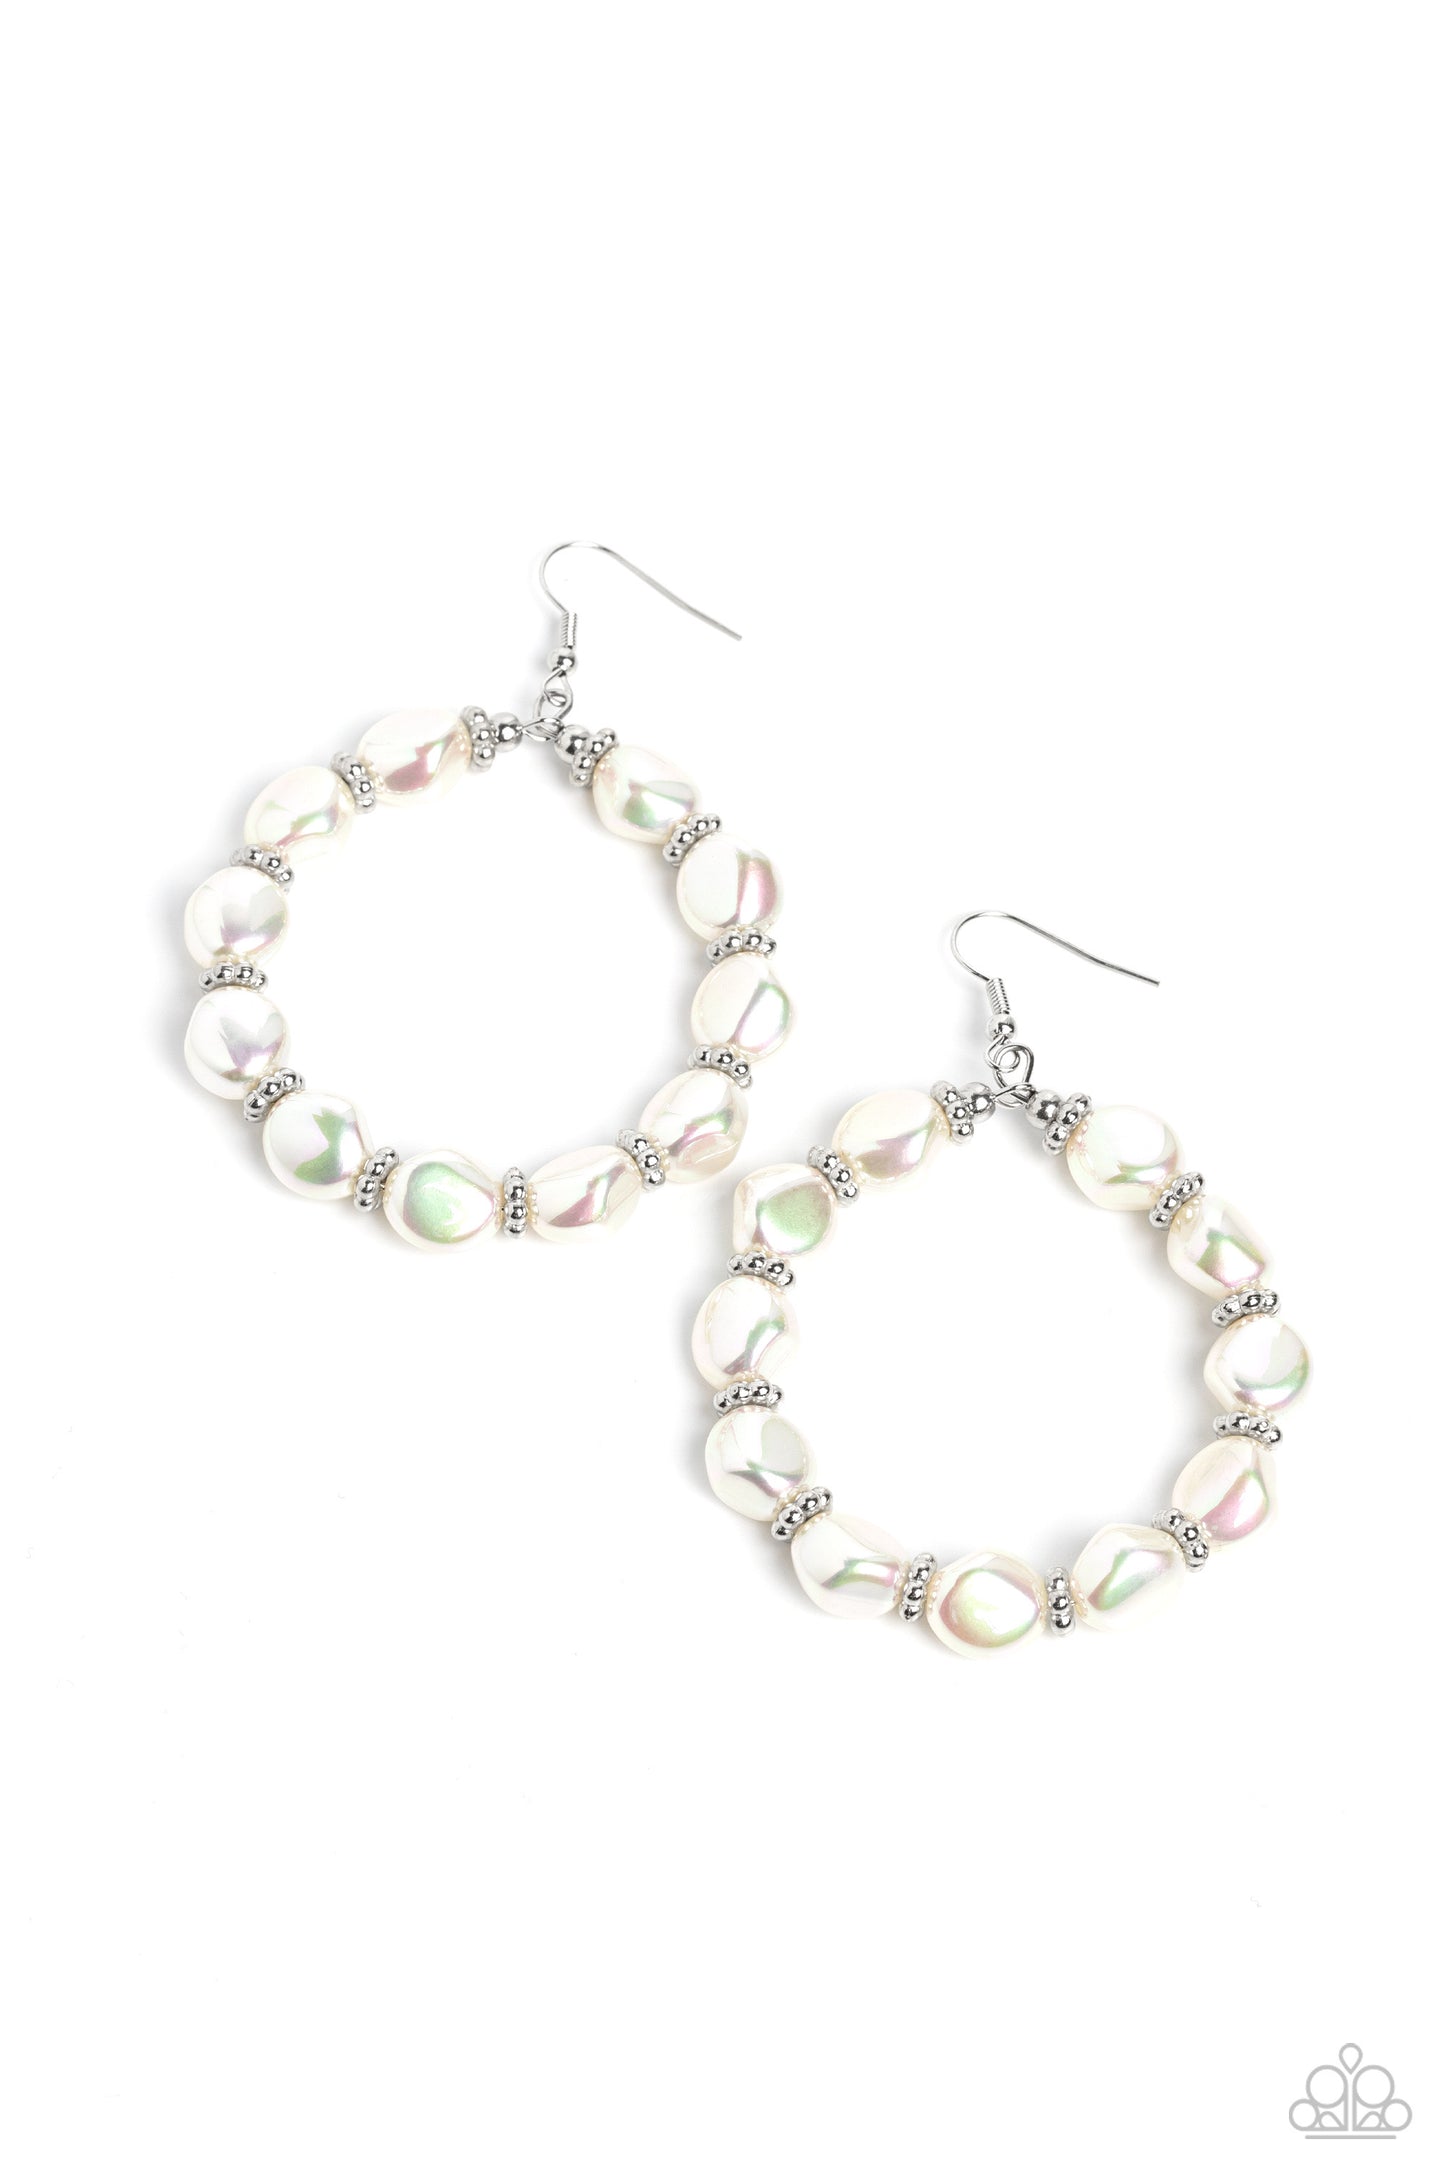 Paparazzi The PEARL Next Door - White Earrings -Paparazzi Jewelry Images 